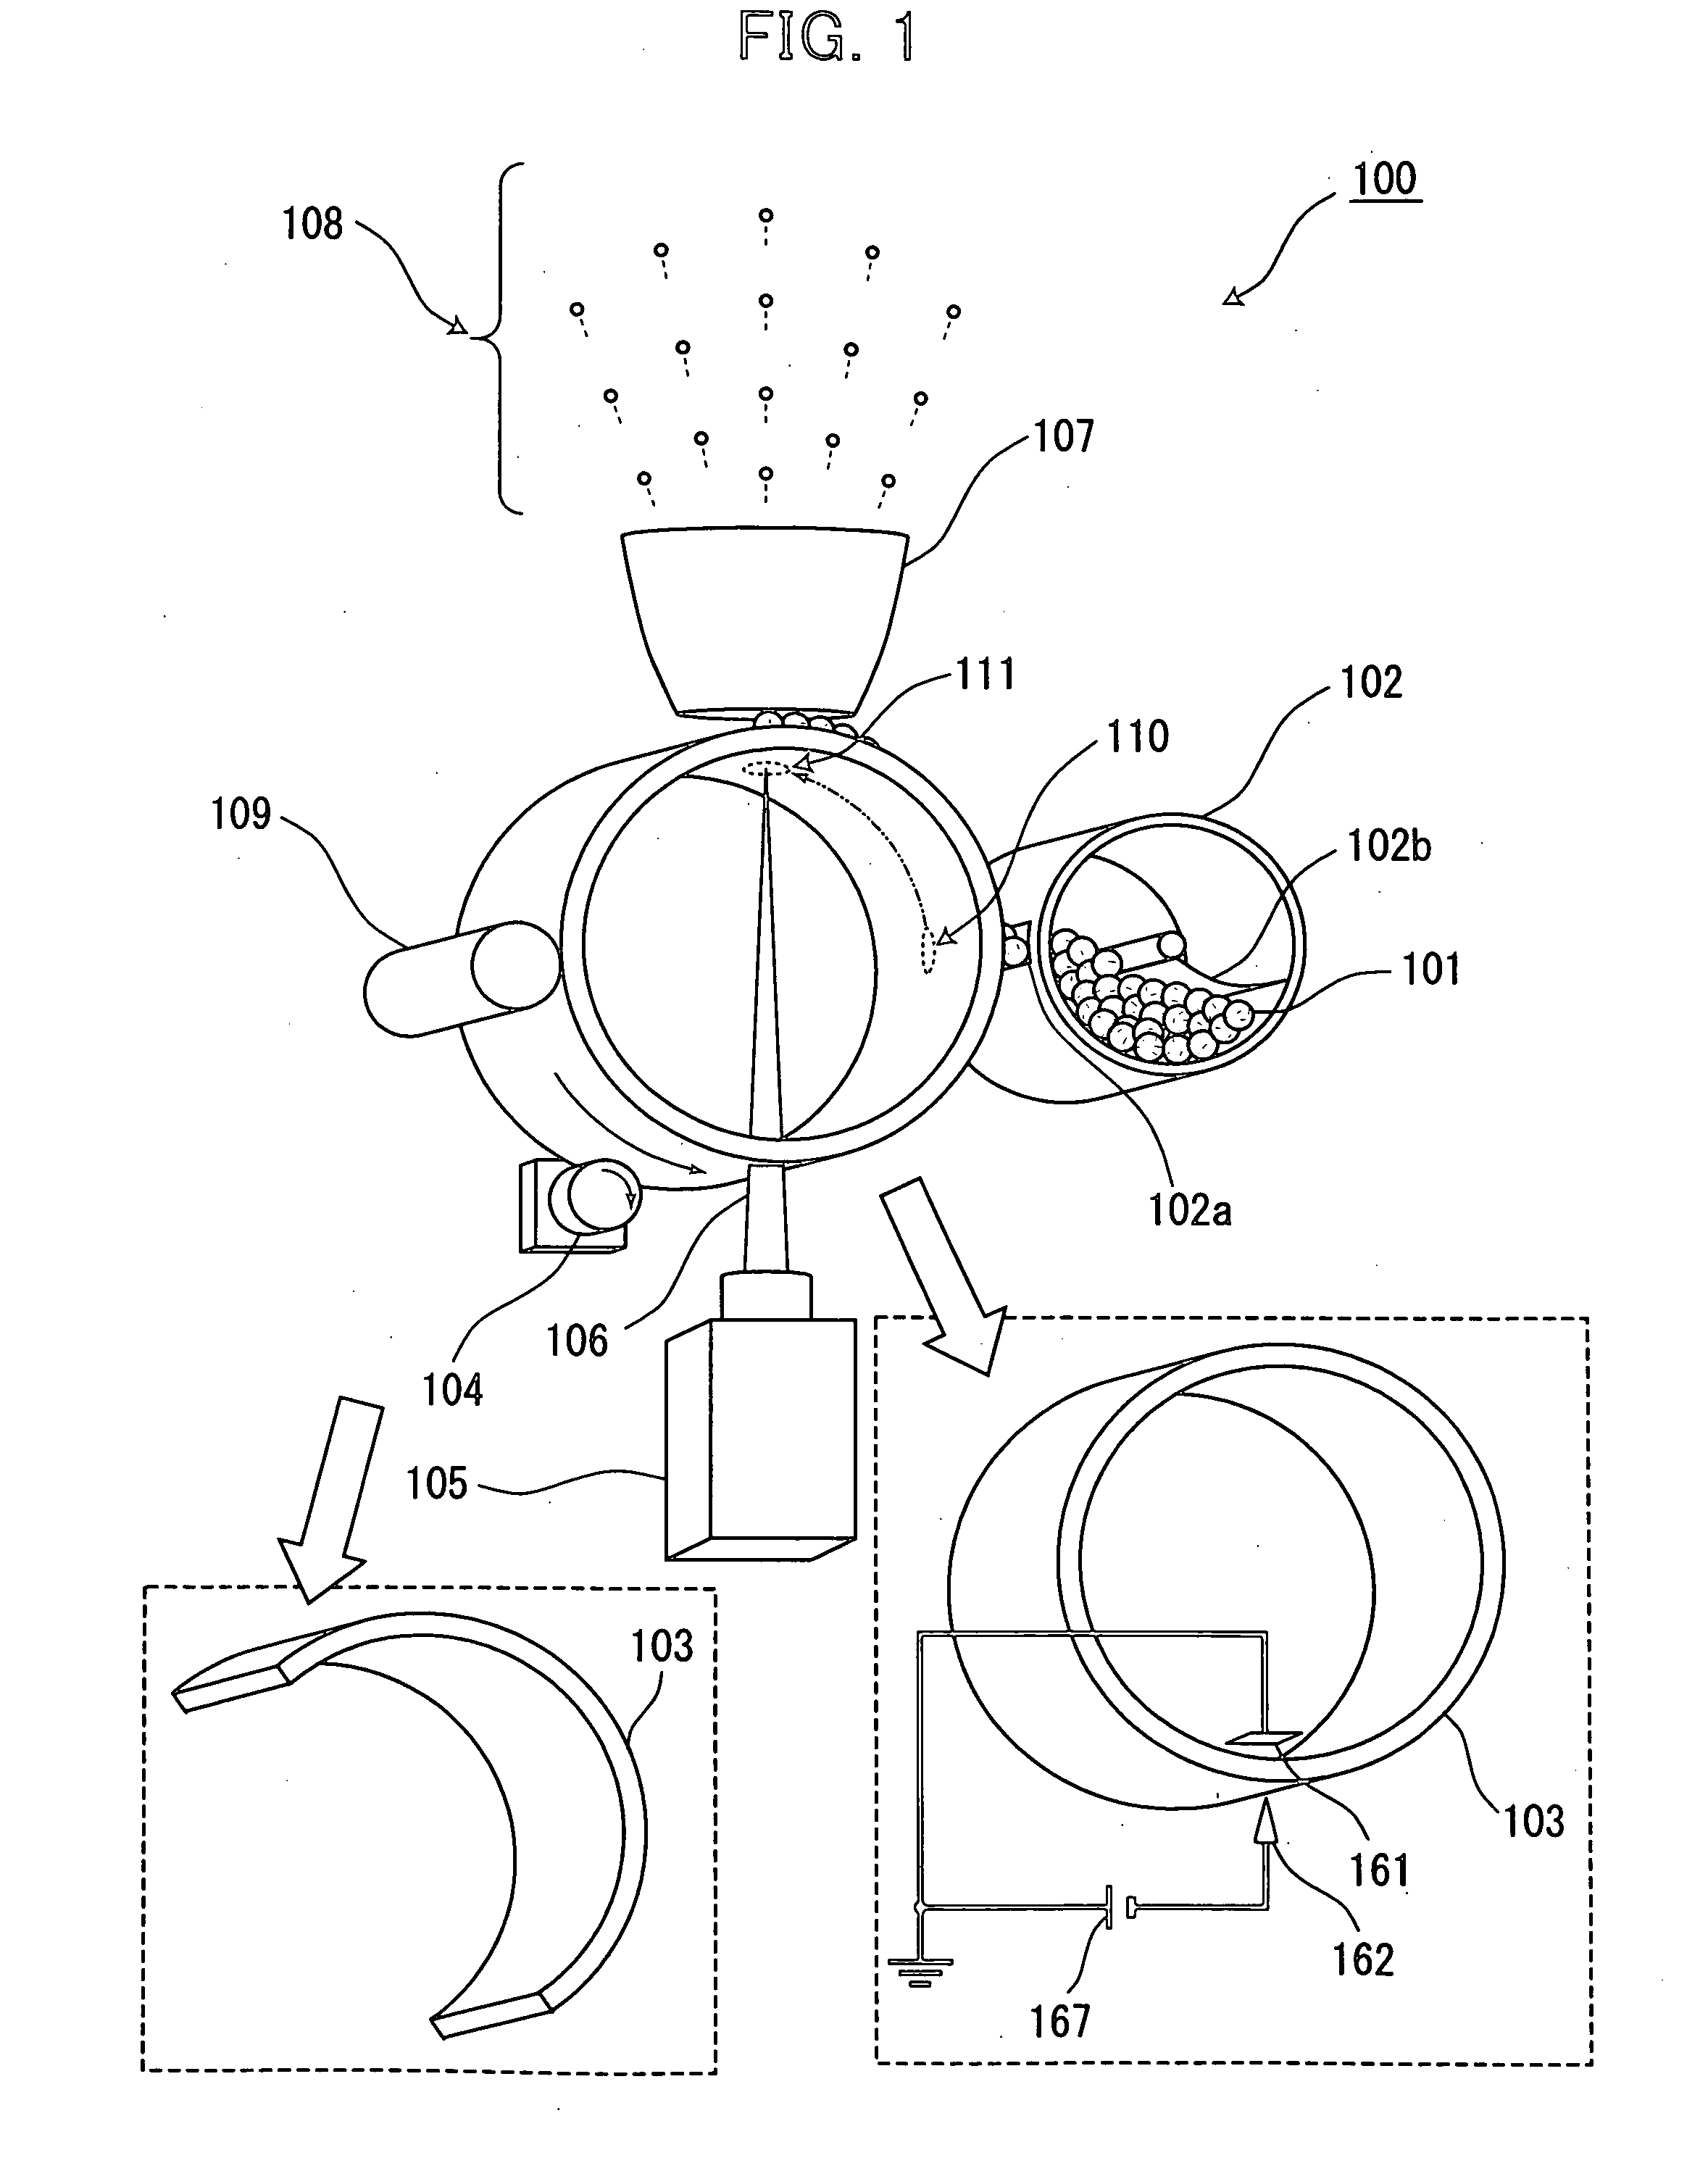 Powder propellant-based space propulsion device